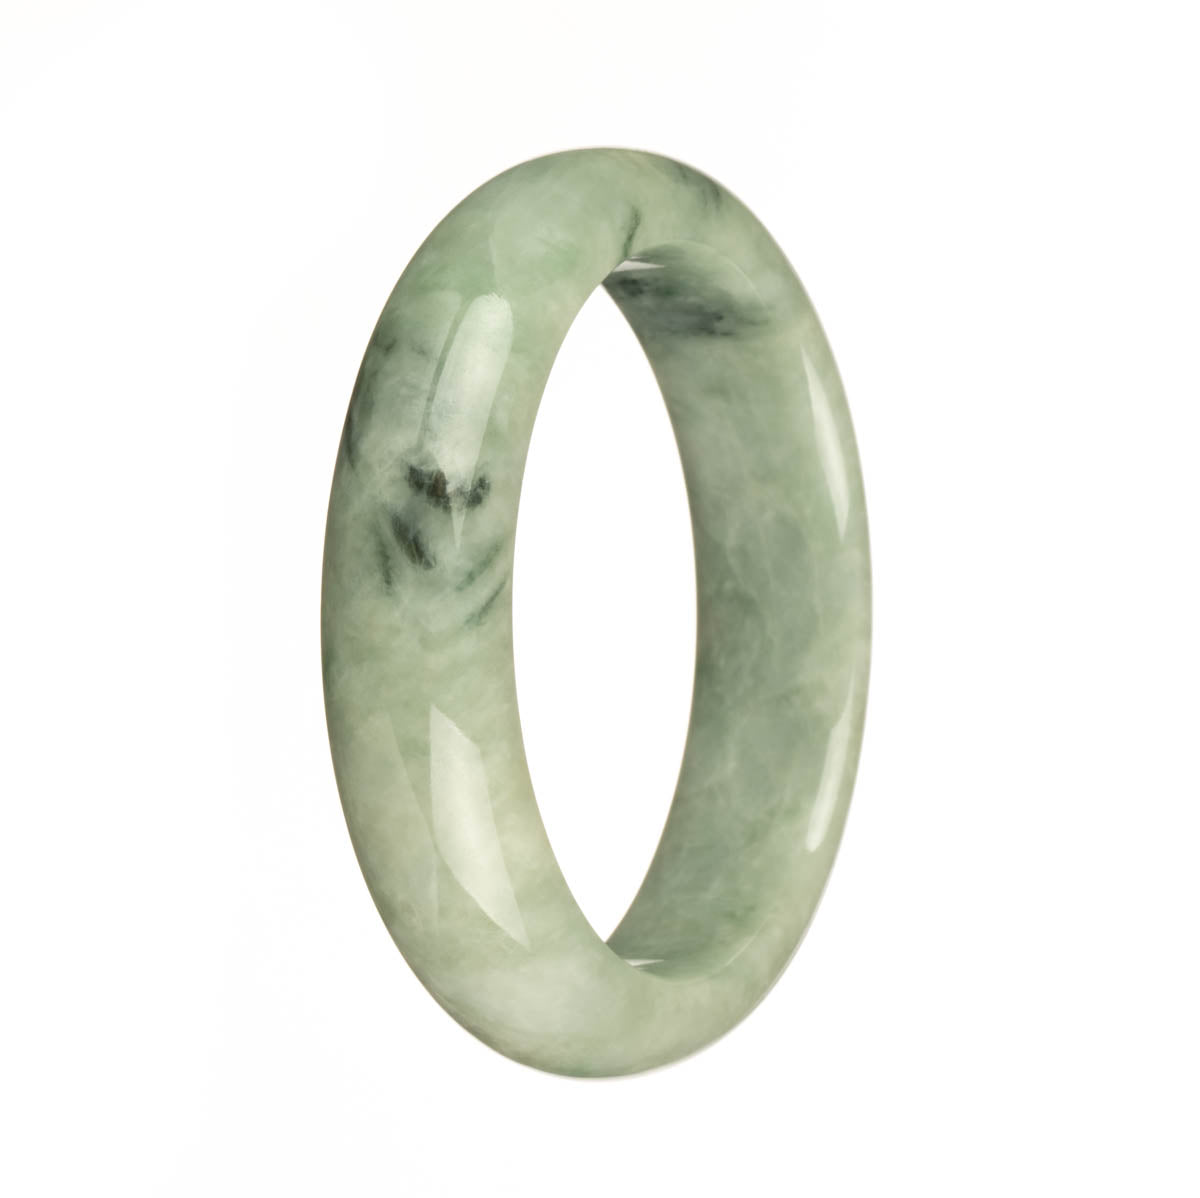 A half moon-shaped Burma Jade bracelet with genuine Grade A Green color, featuring dark green patterns and apple green spots.